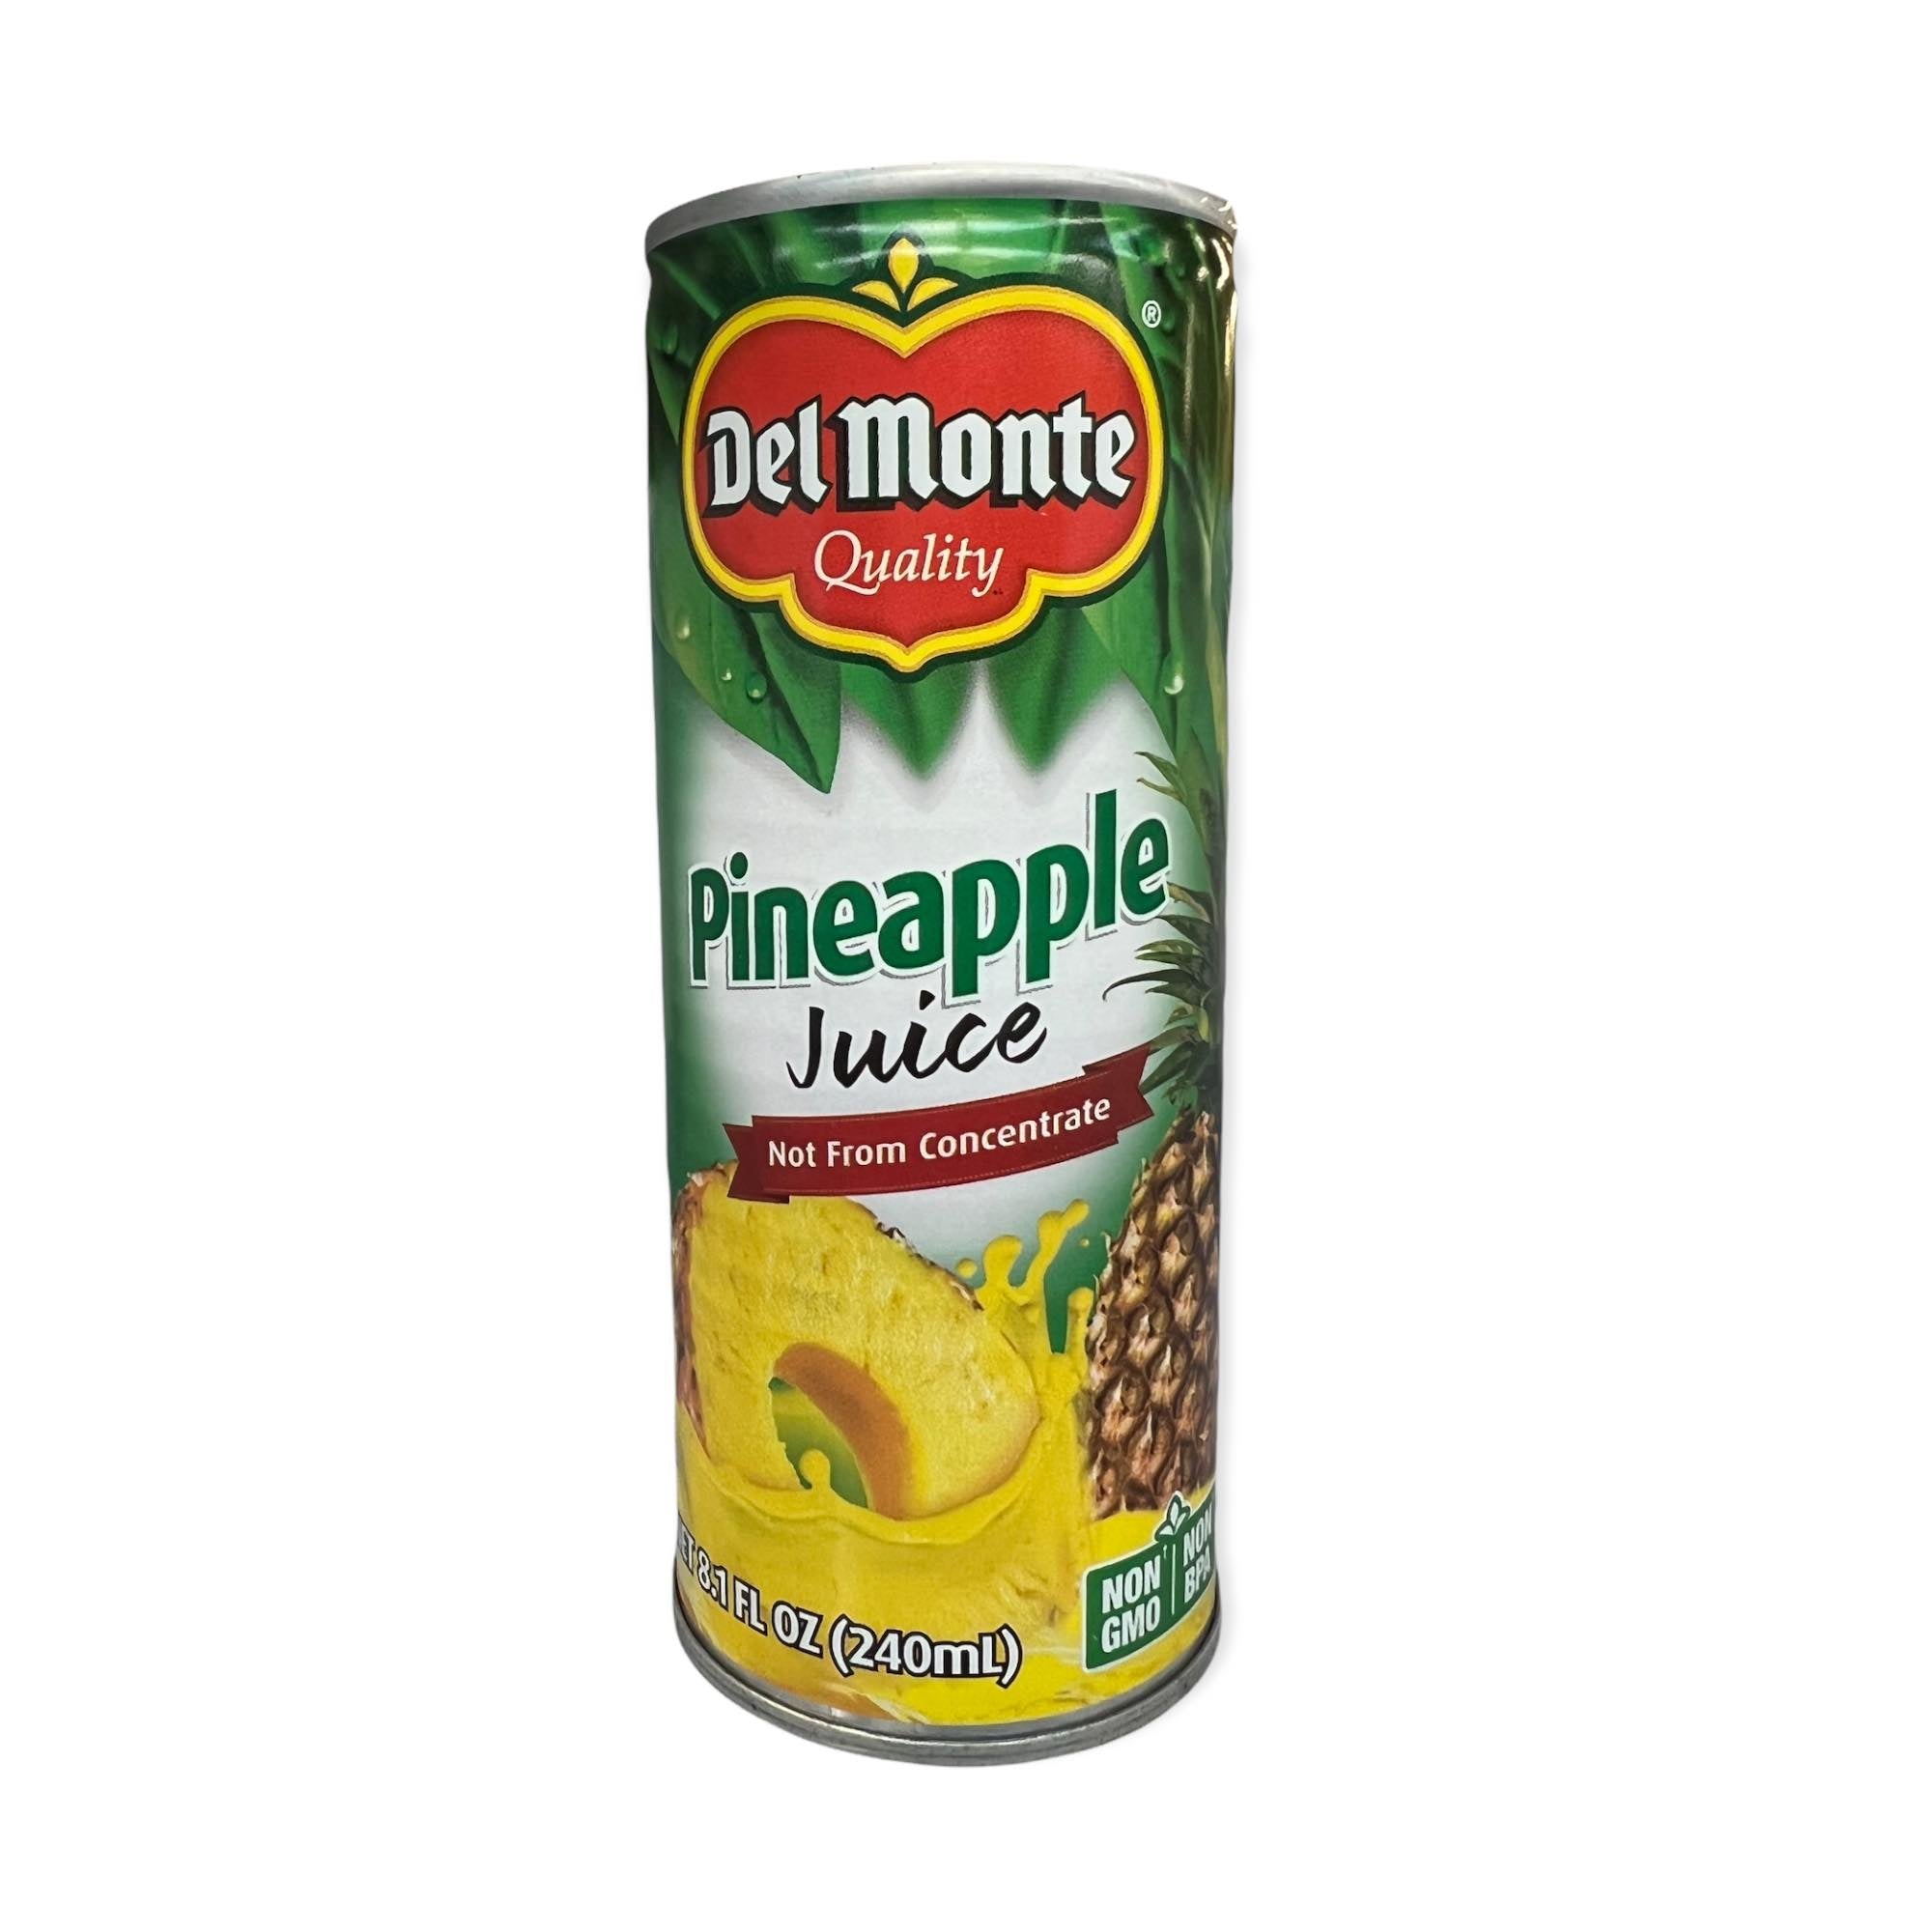 Del Monte Quality - 100% Pineapple Juice with Added Vitamin C in can - 240ml